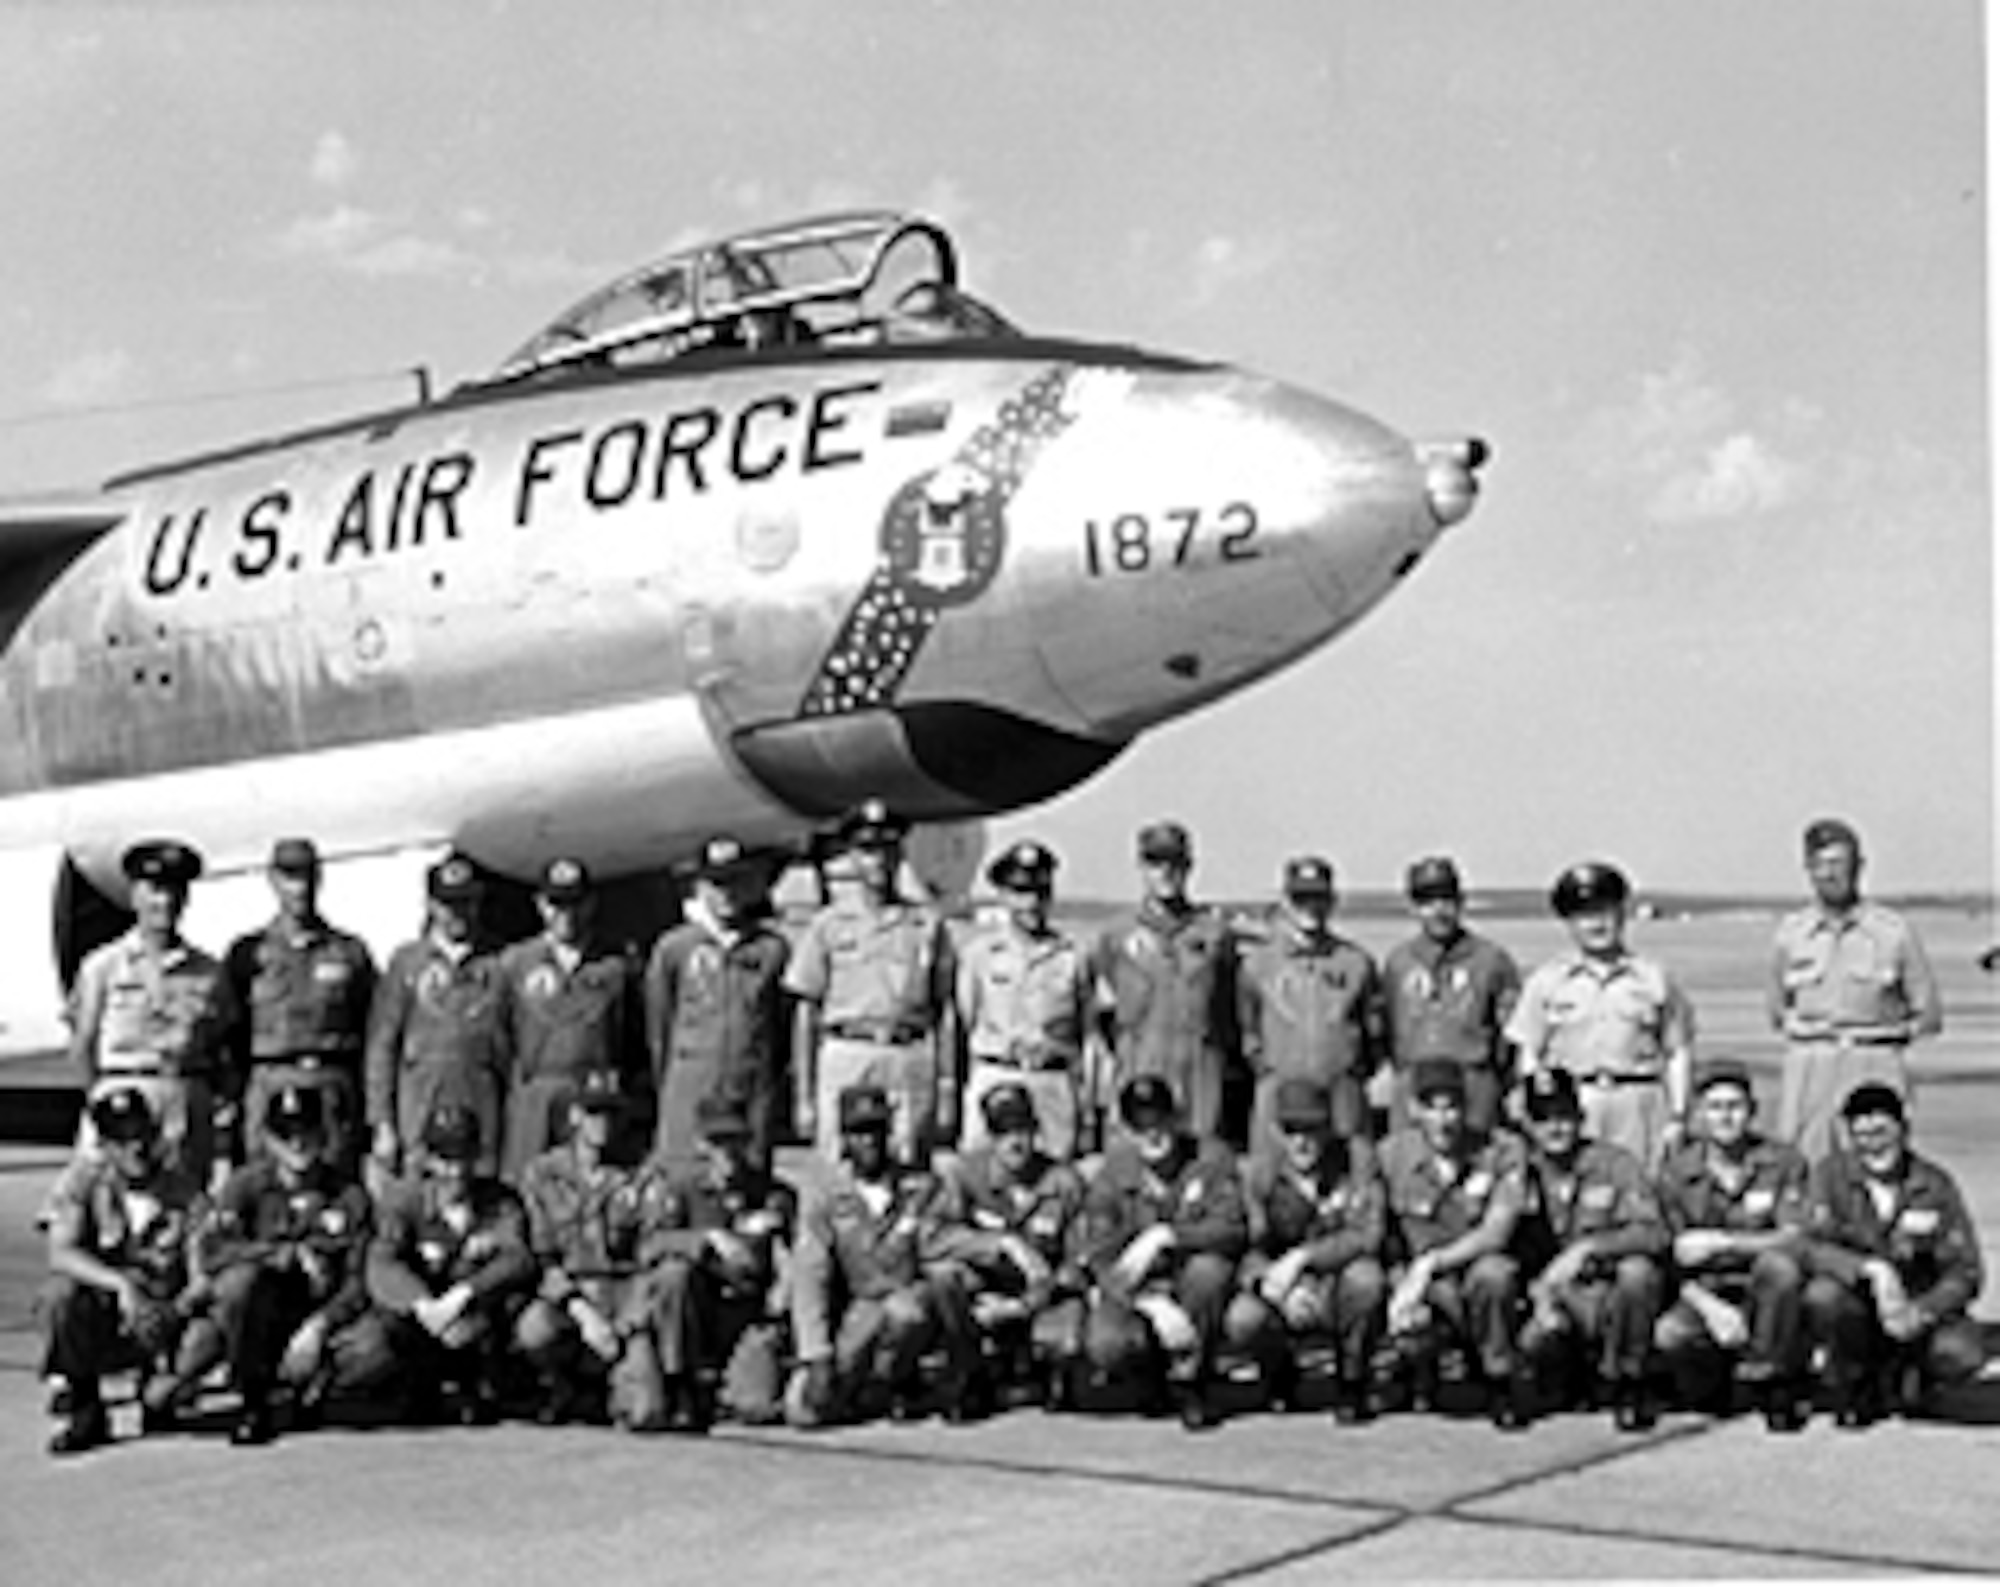 FAIRCHILD AIR FORCE BASE, Wash - Members of the 307th Bomb Wing pose in front of their B-47 Stratojet in 1961 during the 13th Annual Bombing and Navigation Competition. During this Bomb Comp, more categories were include – alert exercise, bombing, navigation, electronic counter-measures, air refueling, pilot techniques, and munitions loading – to determine the specific winner of the Fairchild Trophy. (Courtesy photo)